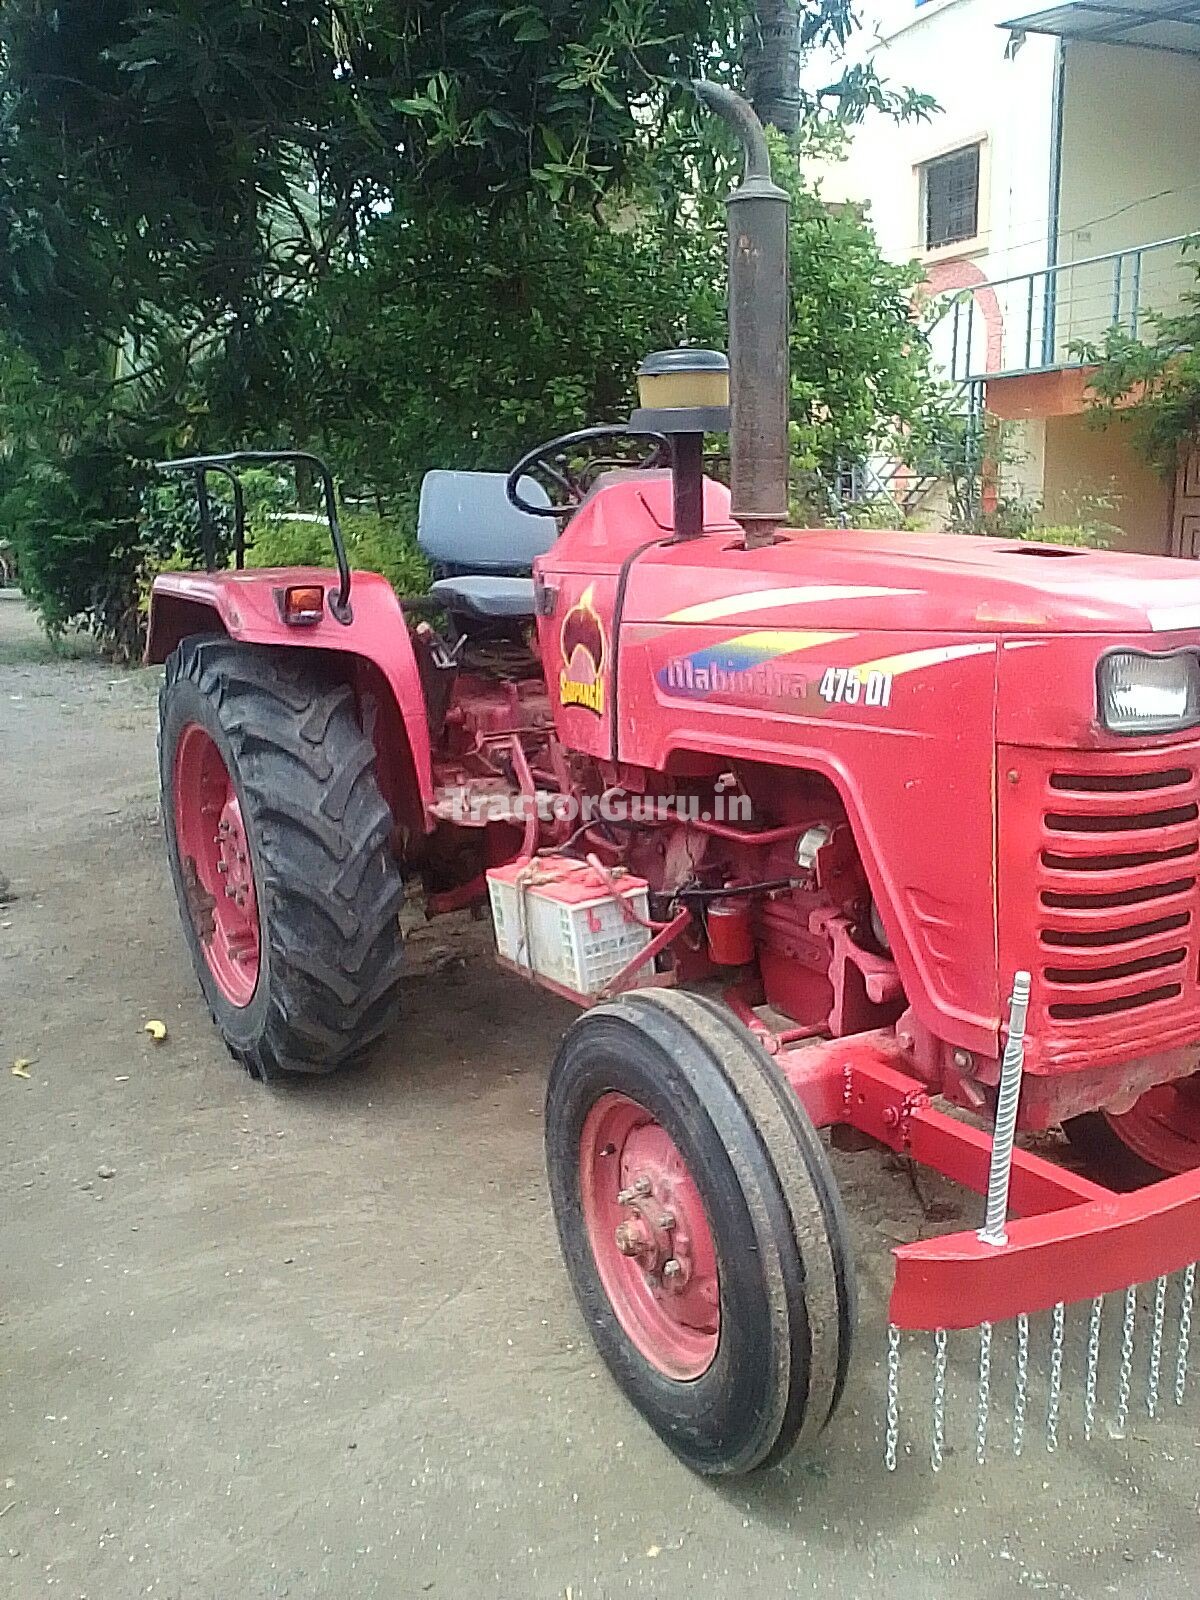 Get Second Hand Mahindra 475 DI SARPANCH Tractor in Good Condition - 4353